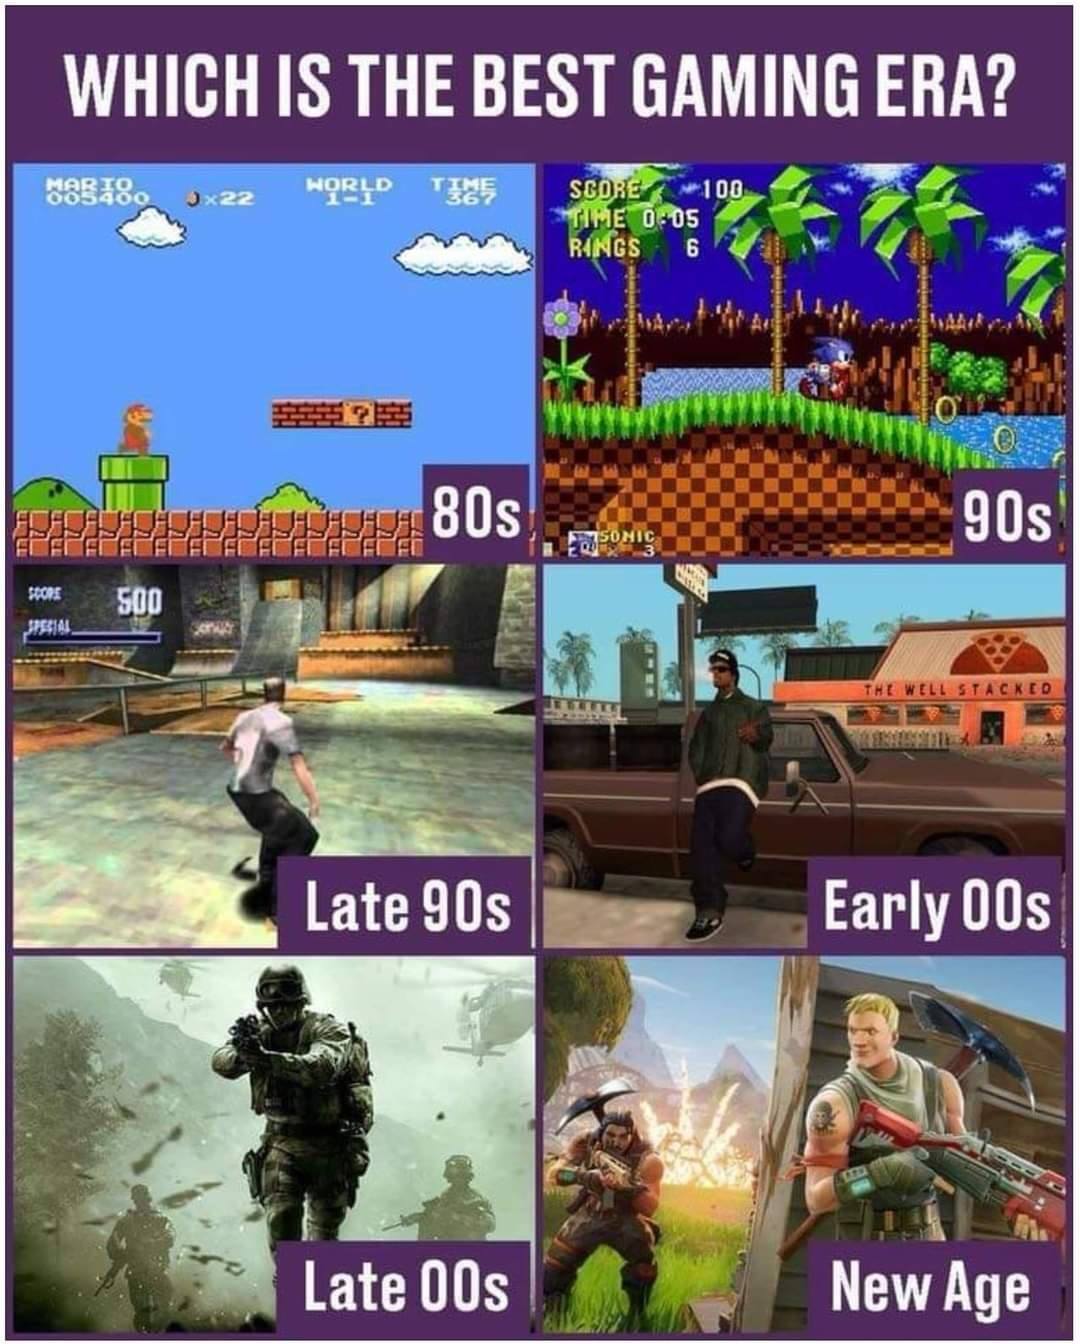 funny gaming memes - sonic the hedgehog 1 - Which Is The Best Gaming Era? Mario World The Score 100 Time 005 Rancs 6 1 80s 90s Fmsomic Score 500 The Well Stacked Teste Late 90s Early Oos Late 00s New Age